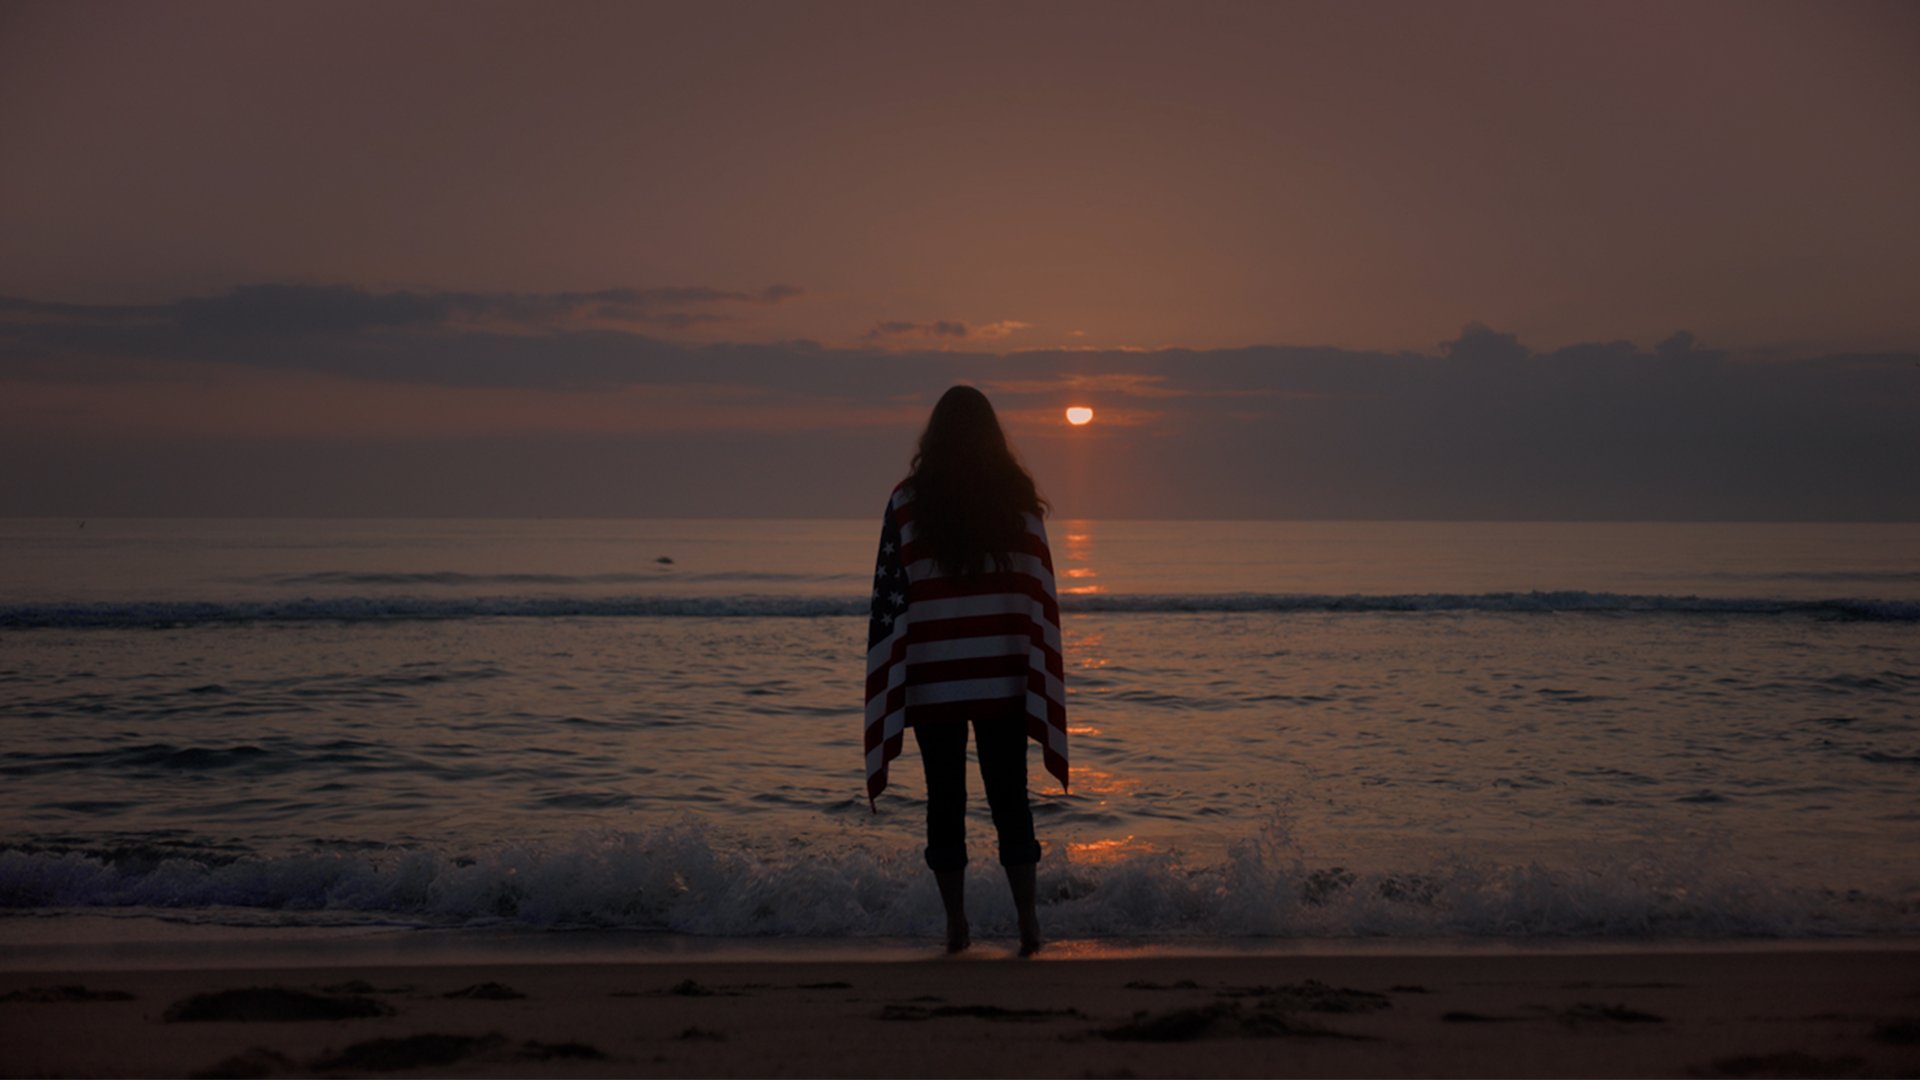 A woman looks out over the horizon at a sunset.